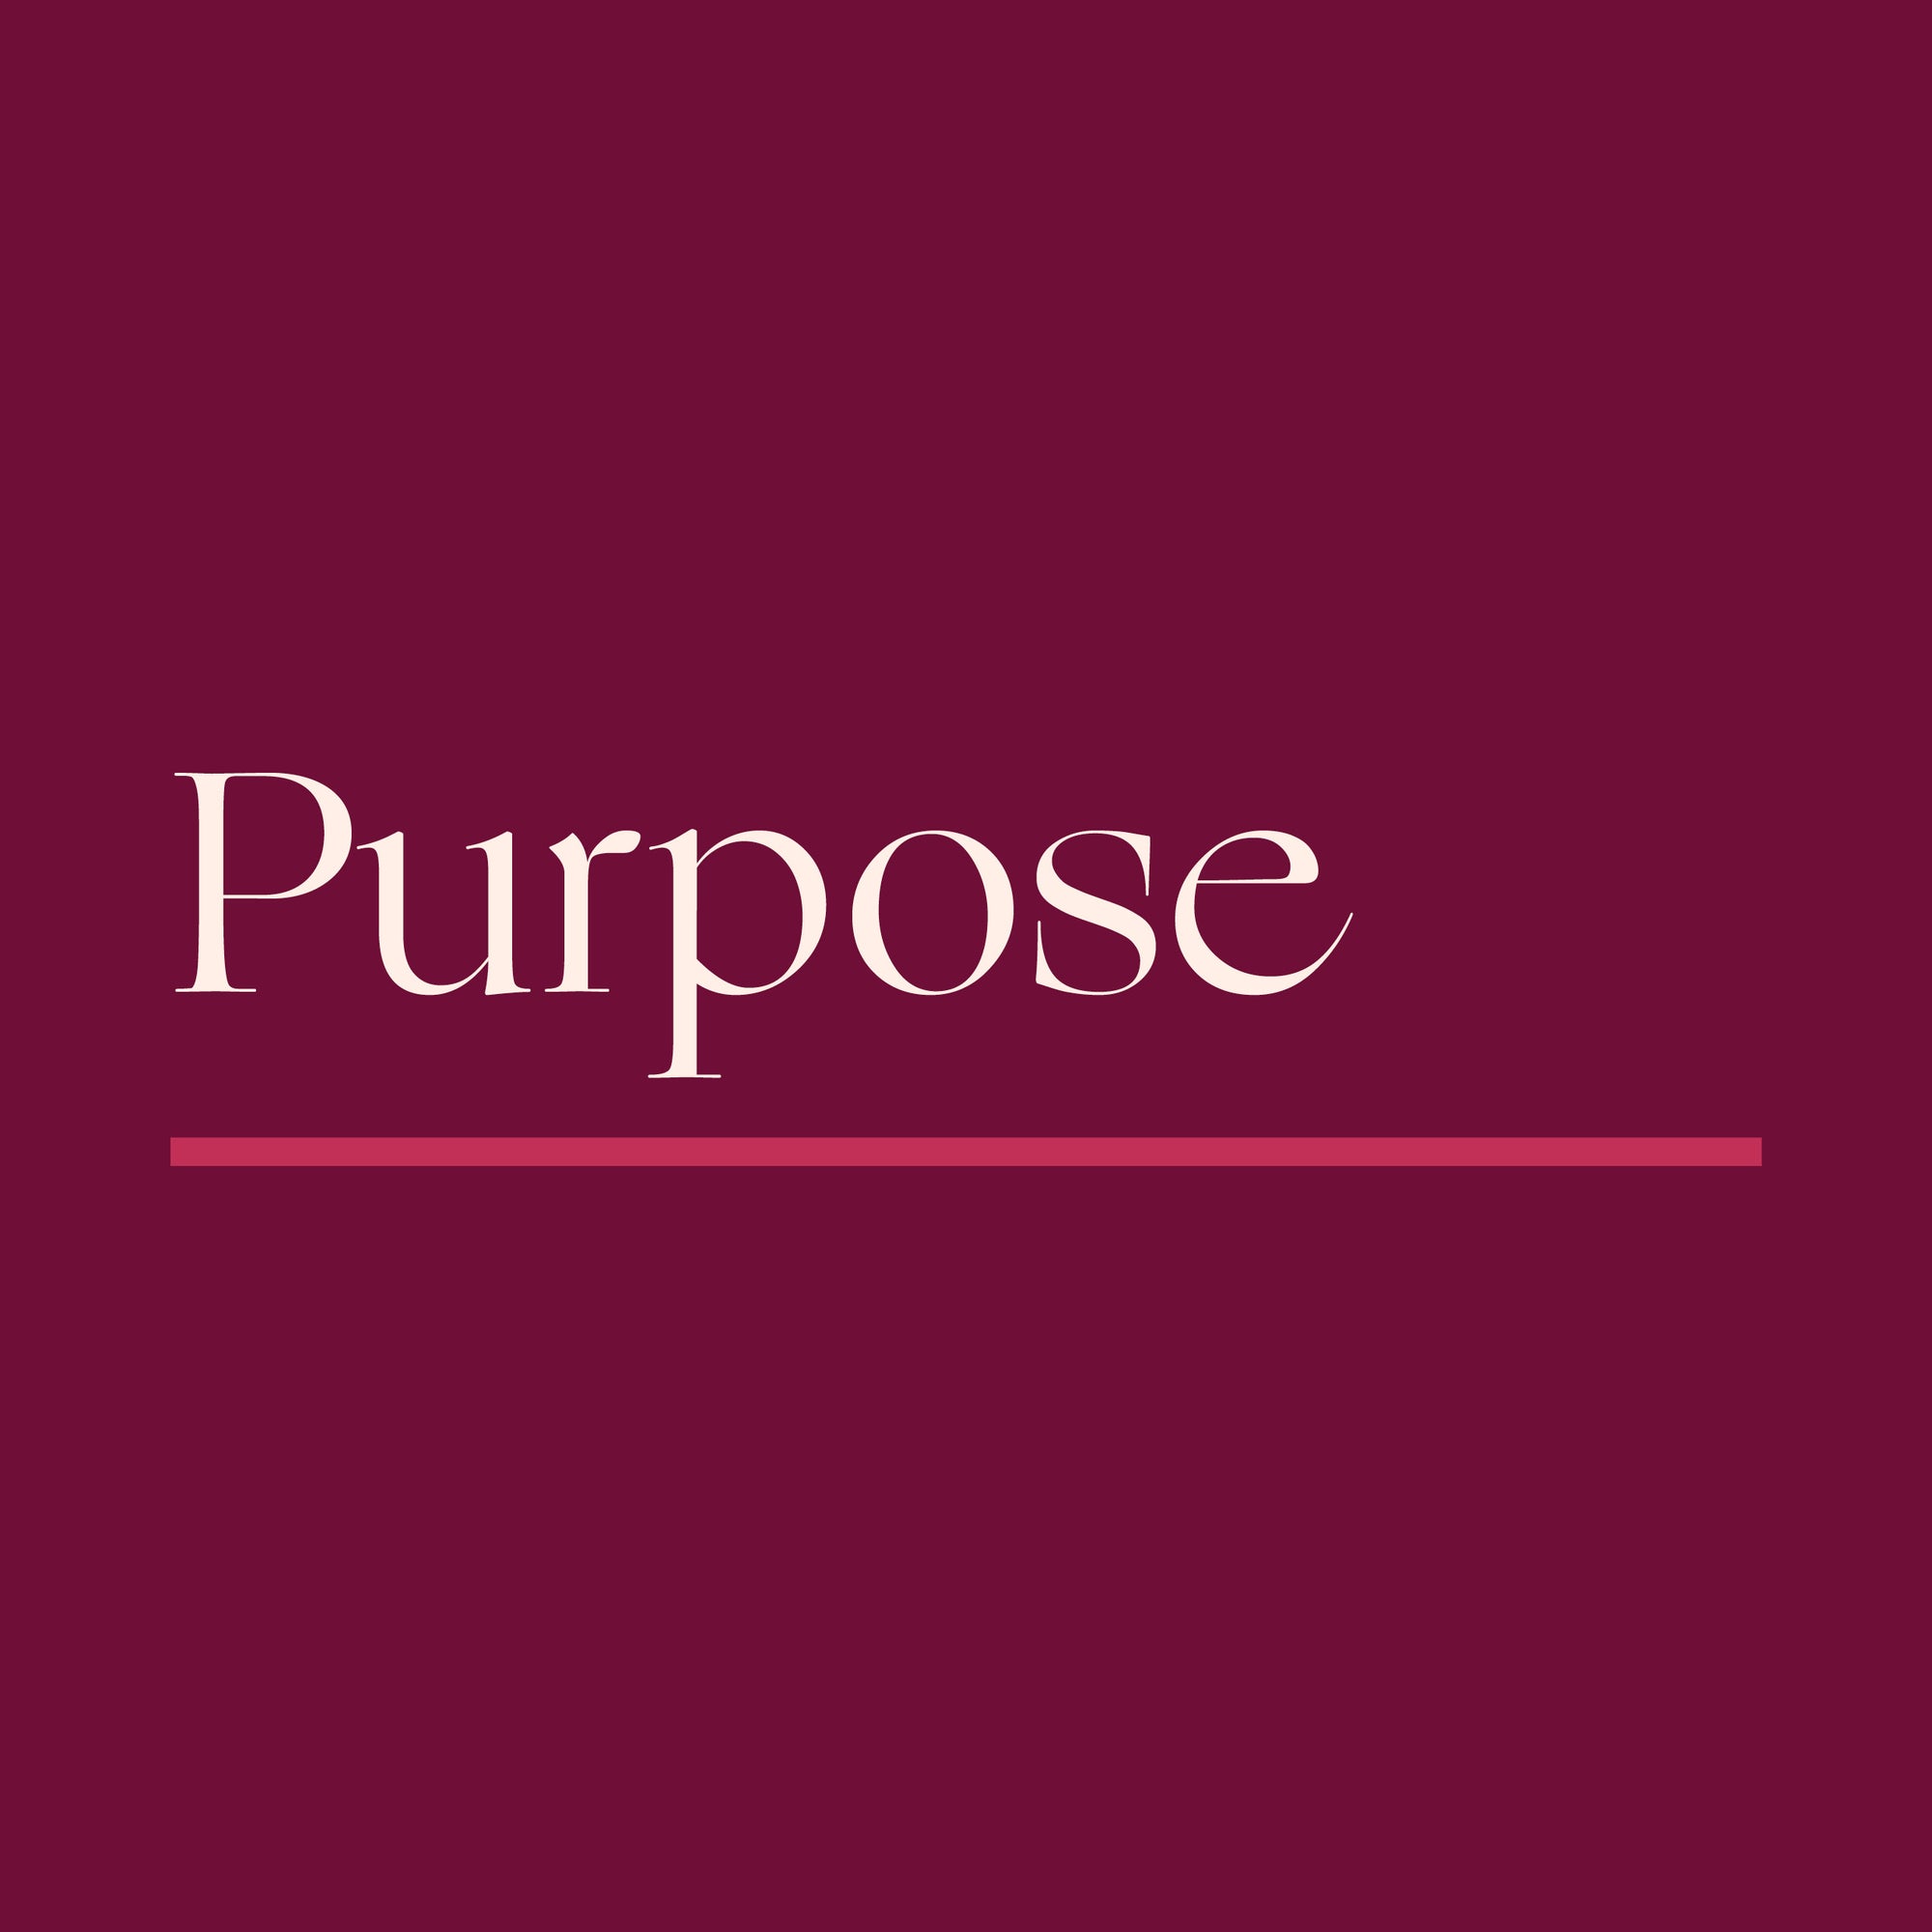 Image of the word Purpose